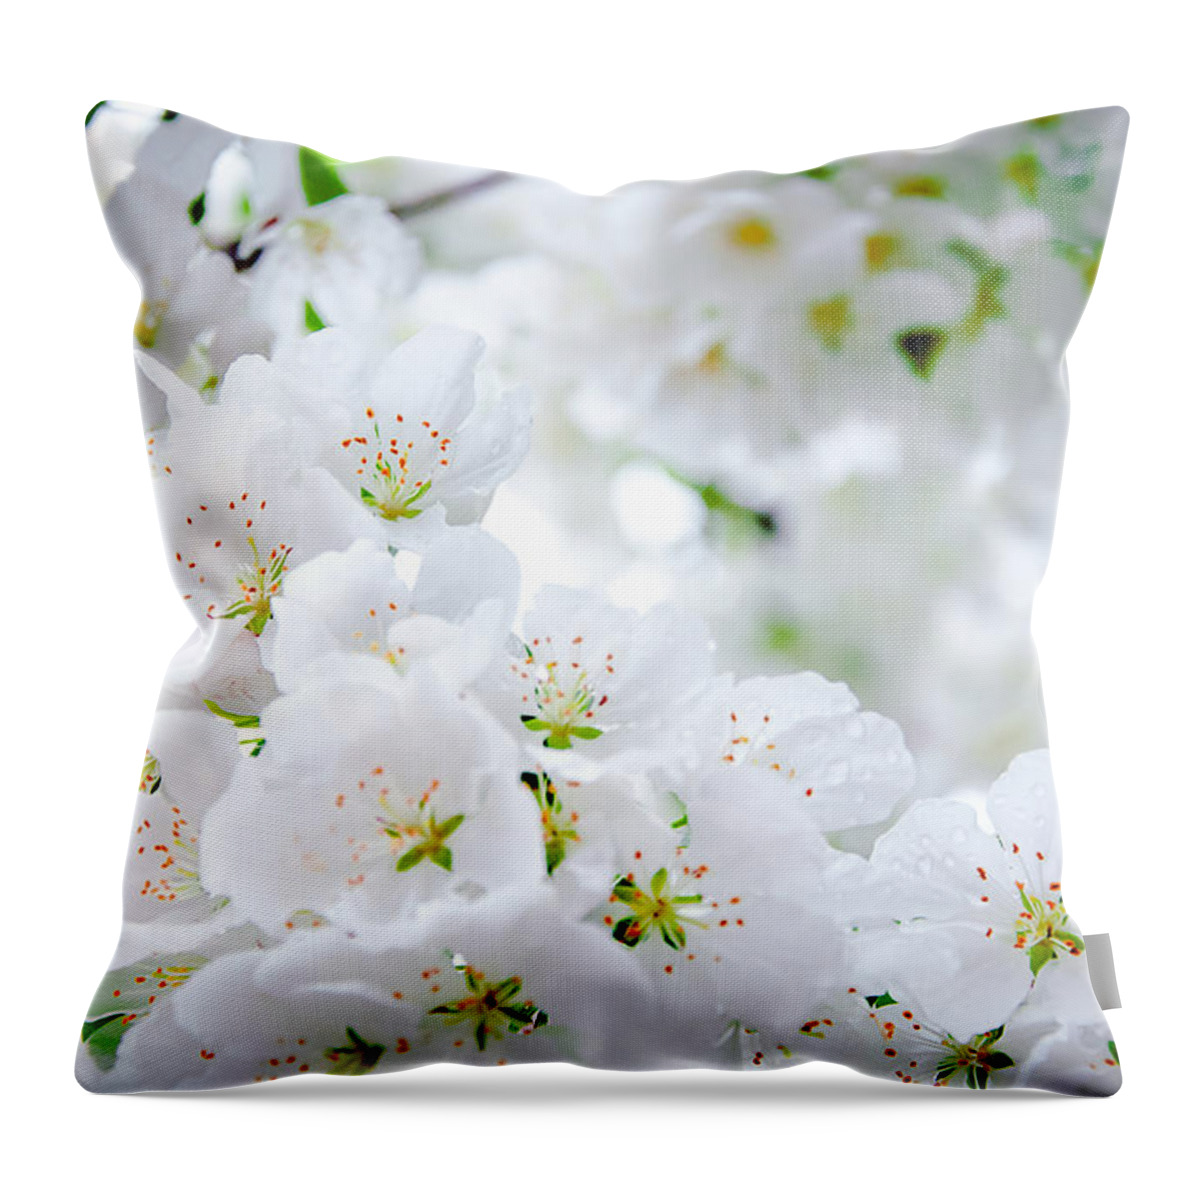 Flowers Throw Pillow featuring the photograph Depth Perception by Greg Fortier